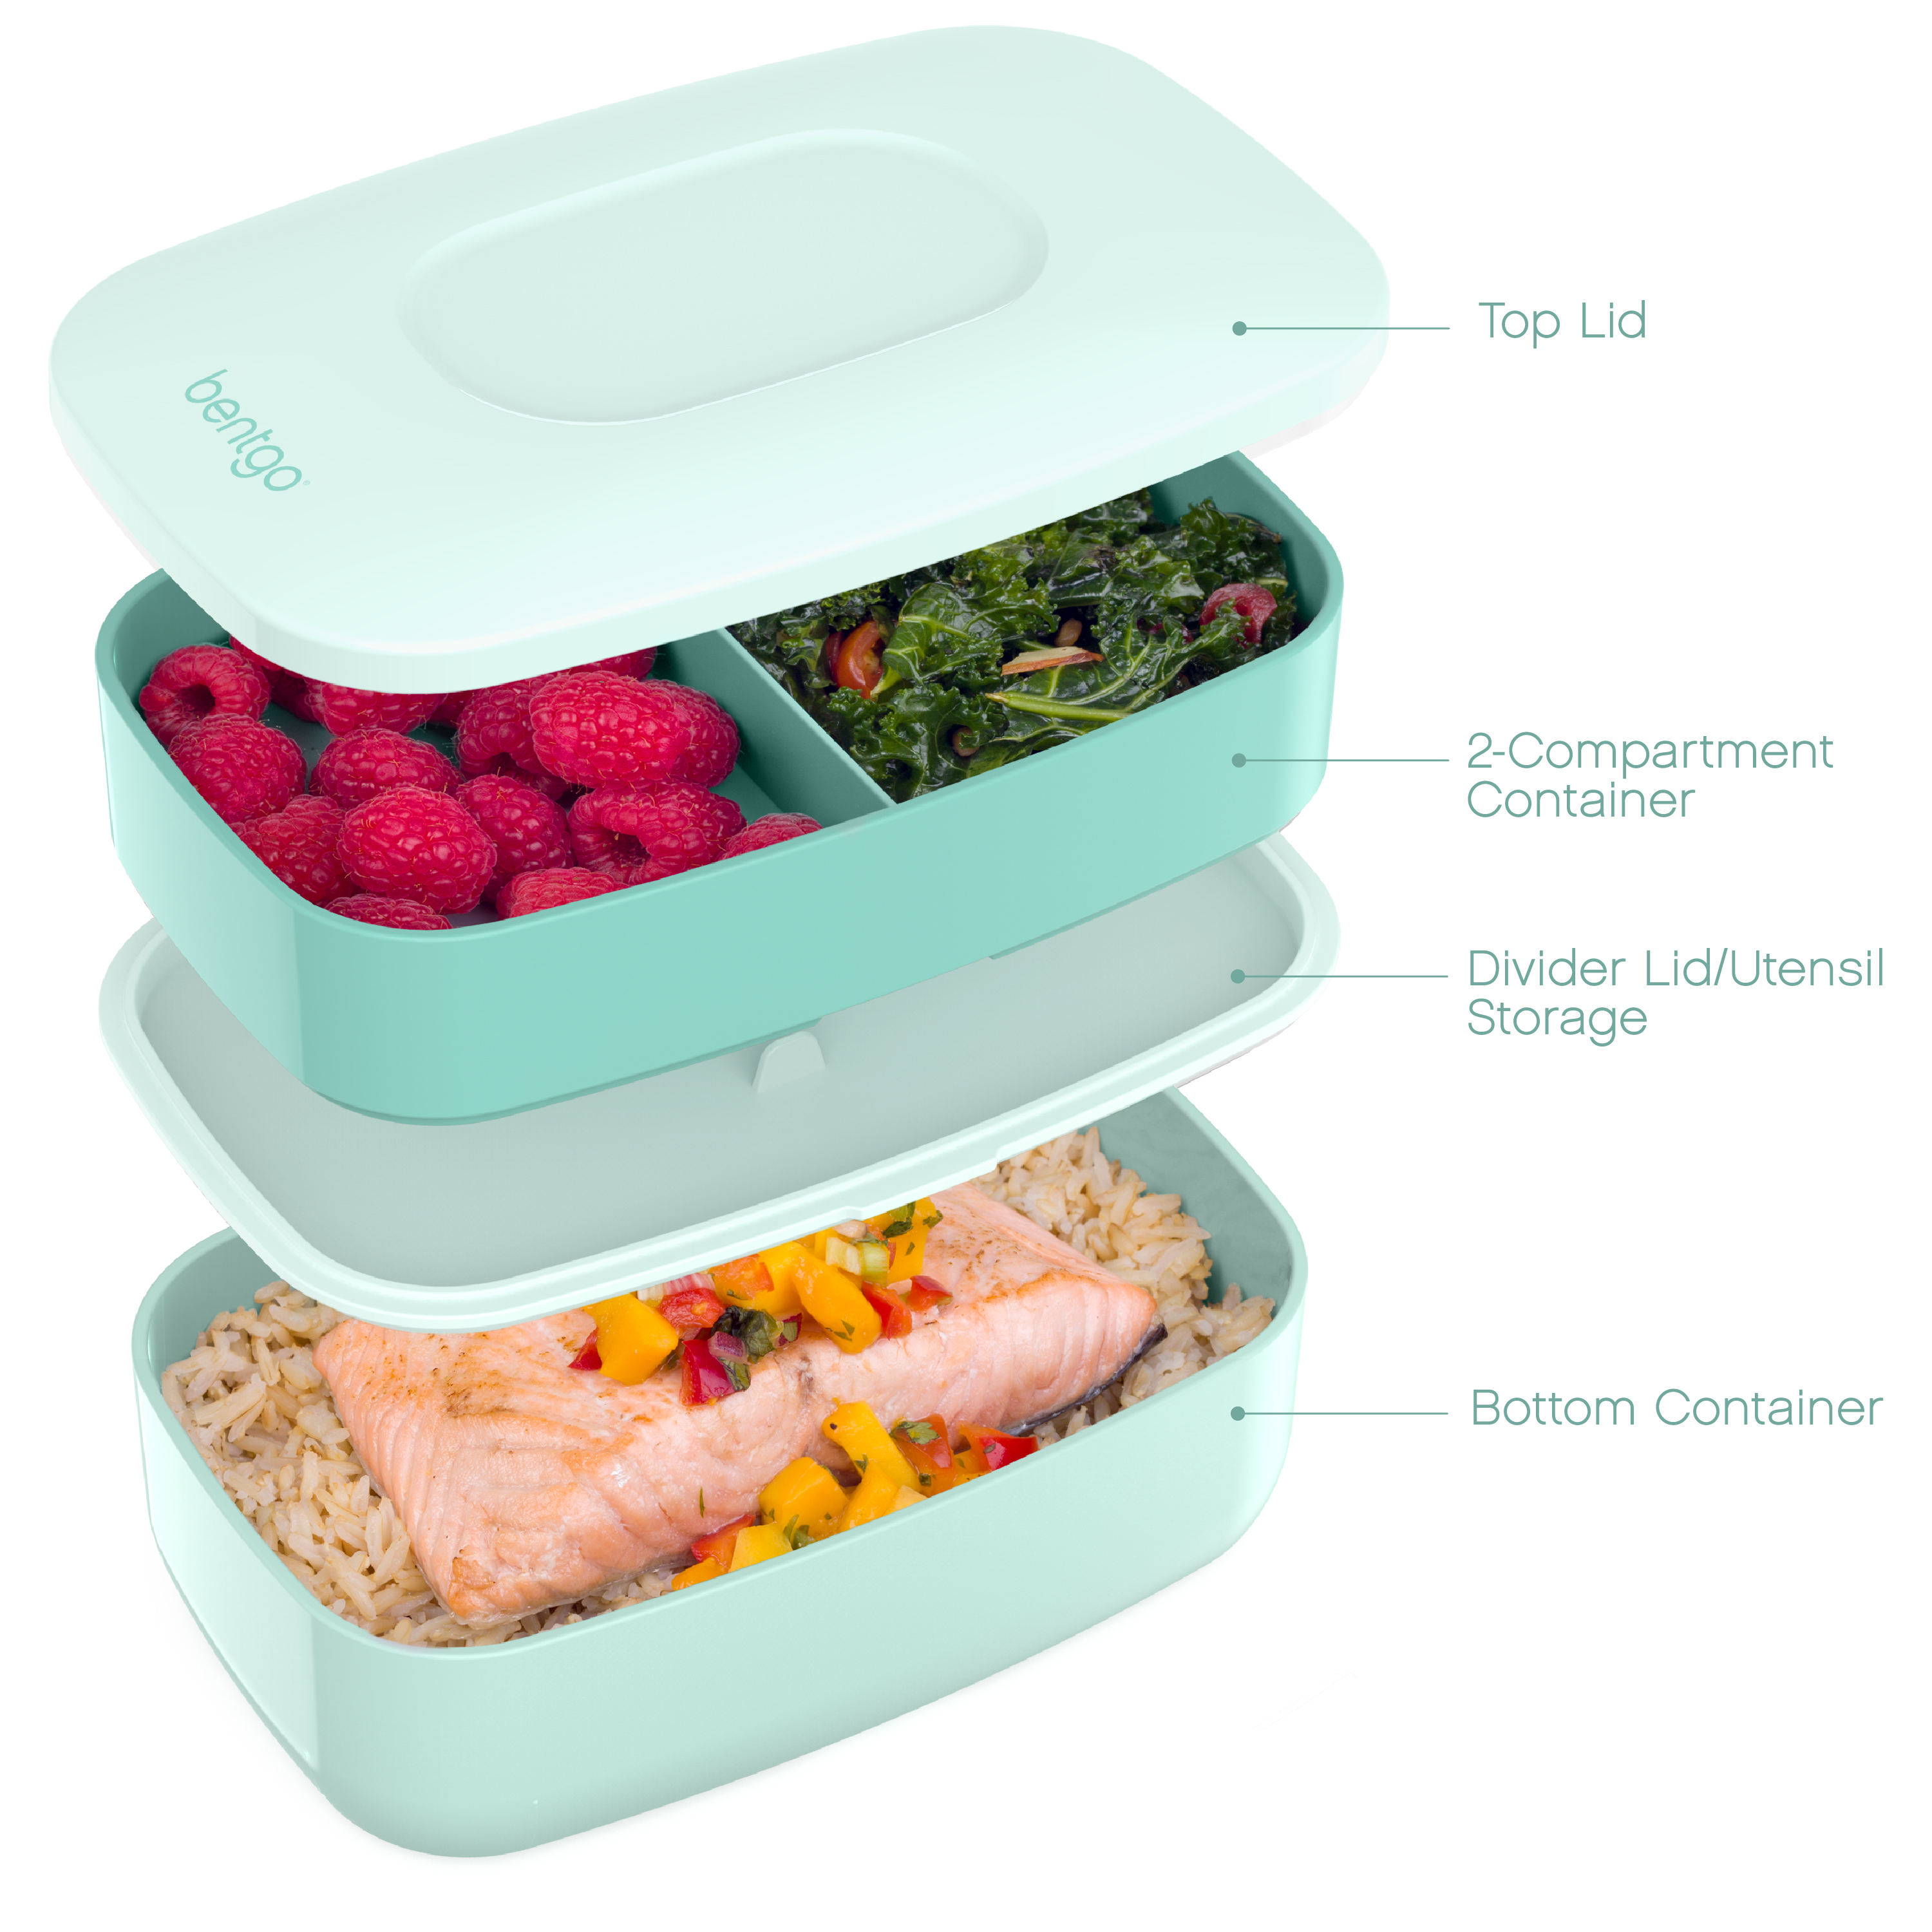 Bentgo Classic - All-in-One Stackable Bento Lunch Box Container - Modern Bento-Style Design Includes 2 Stackable Containers, Built-in Plastic Utensil Set, and Nylon Sealing Strap (Coastal Aqua) - image 3 of 5